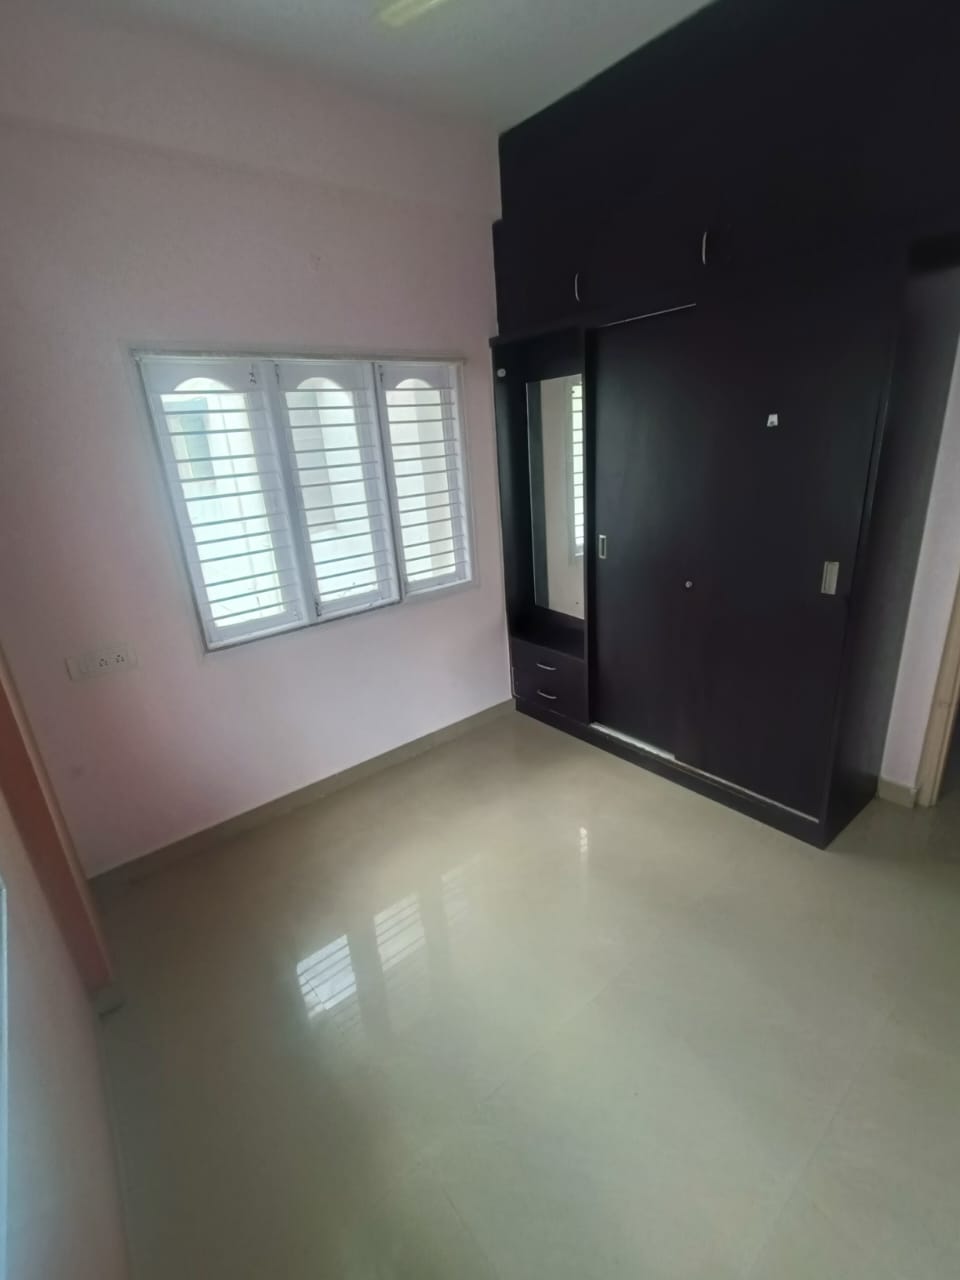 1 BHK Residential Apartment for Lease Only at JAML2 - 4173 in Kammanahalli